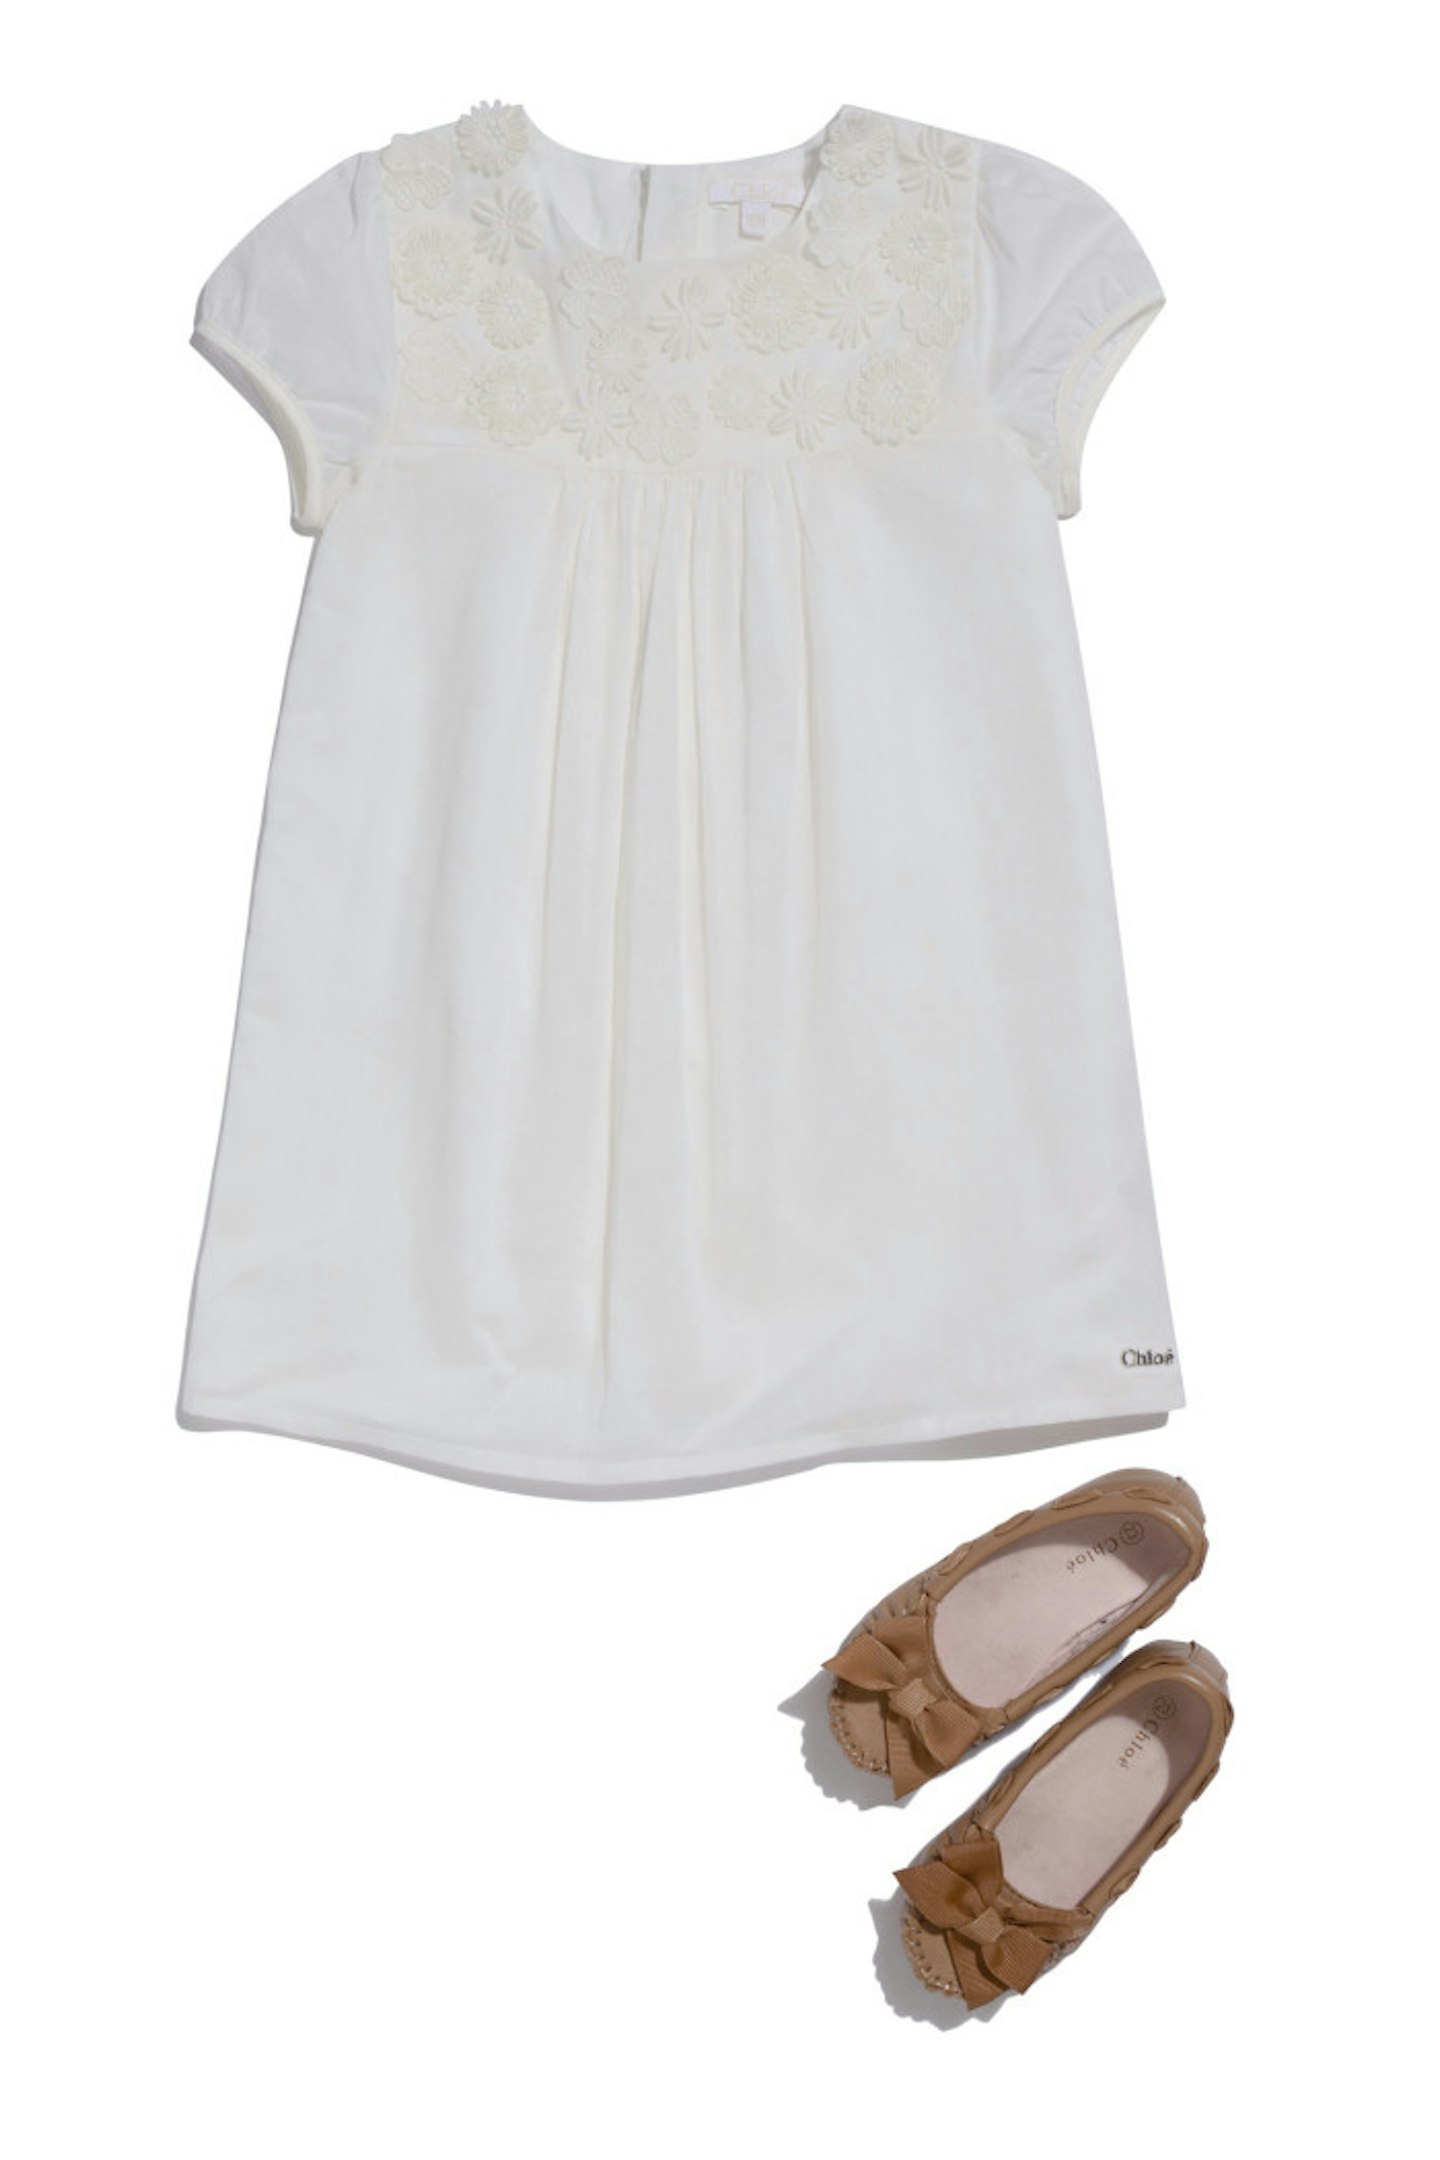 Chloe cream flower embellished dress and matching Chloe brown bow pumps